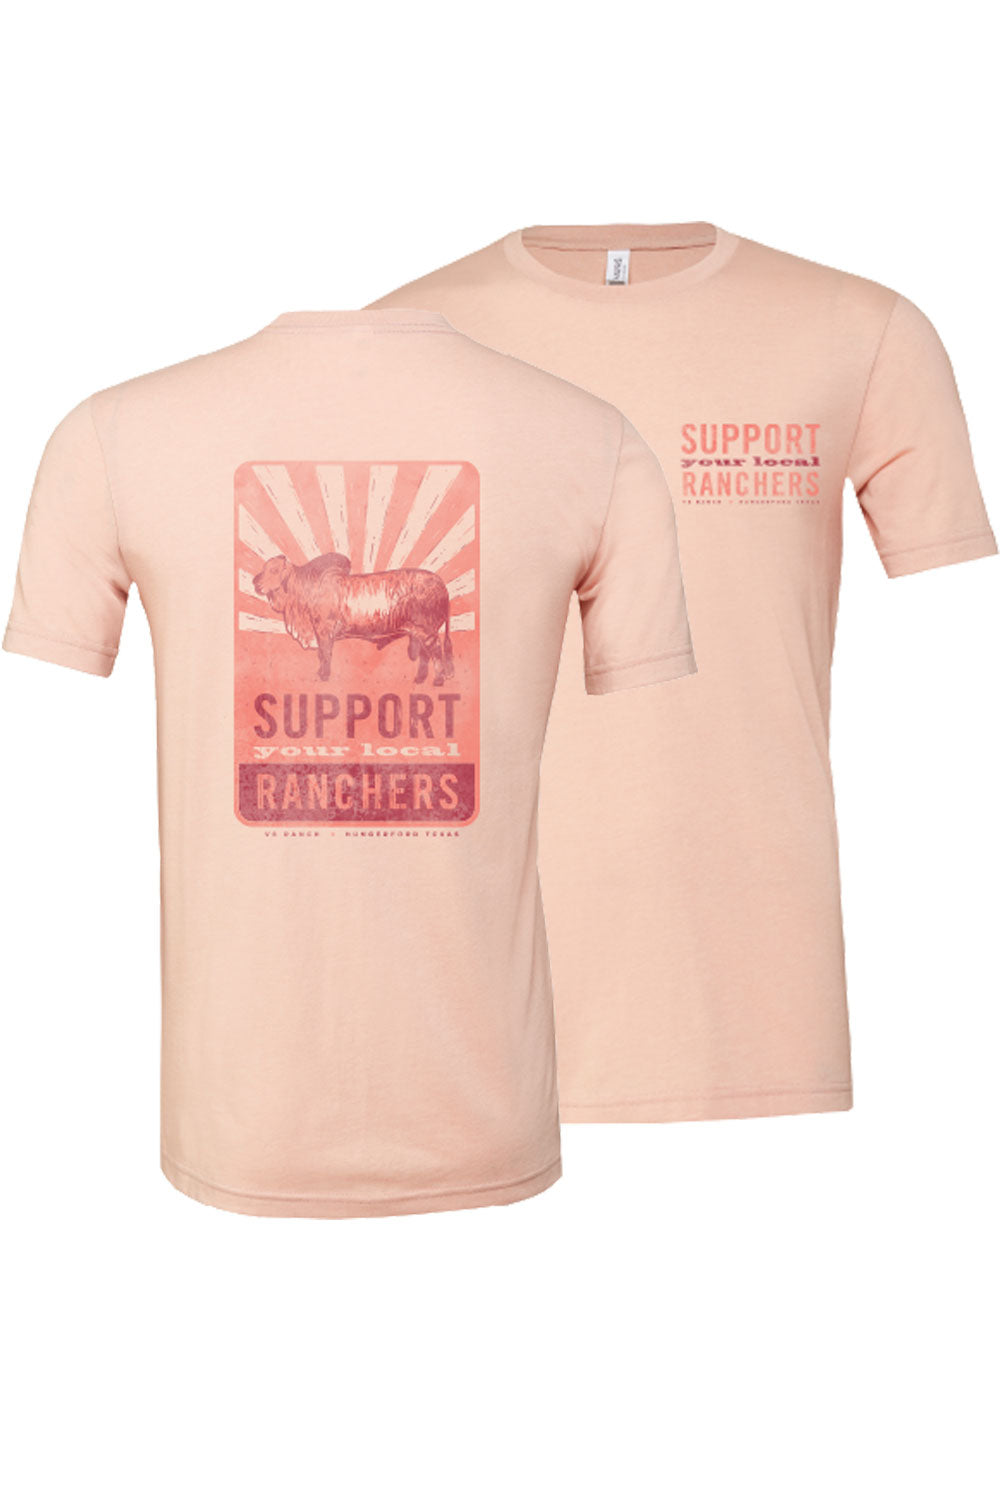 Youth Pink Support Your Local Ranchers Tee